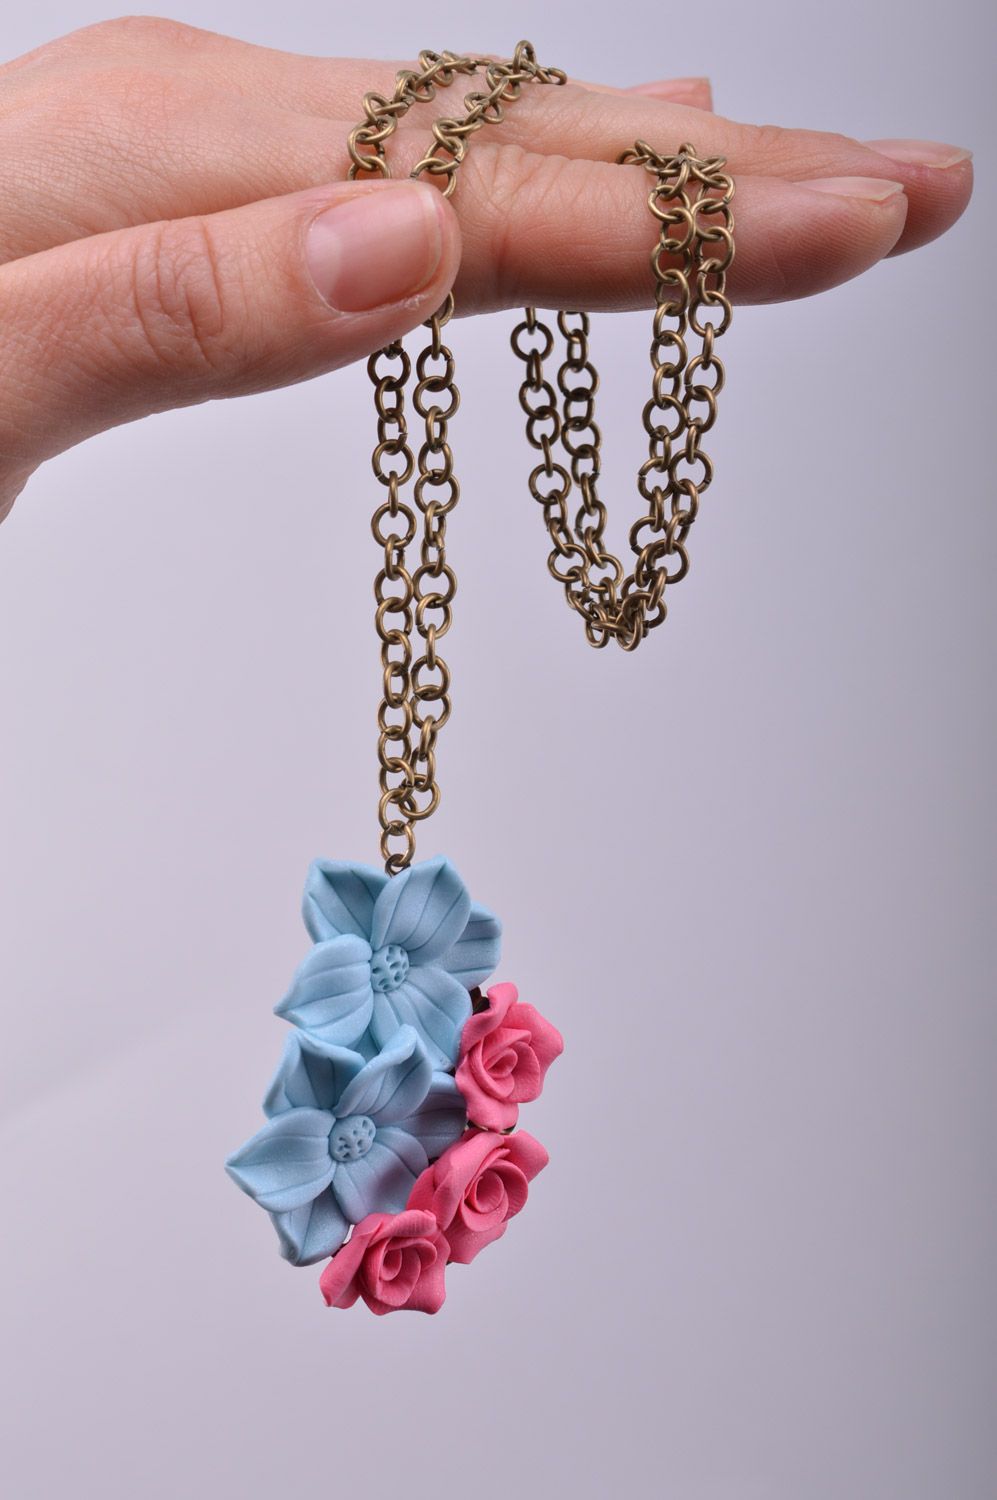 Homemade polymer clay flower neck pendant with metal chain photo 5